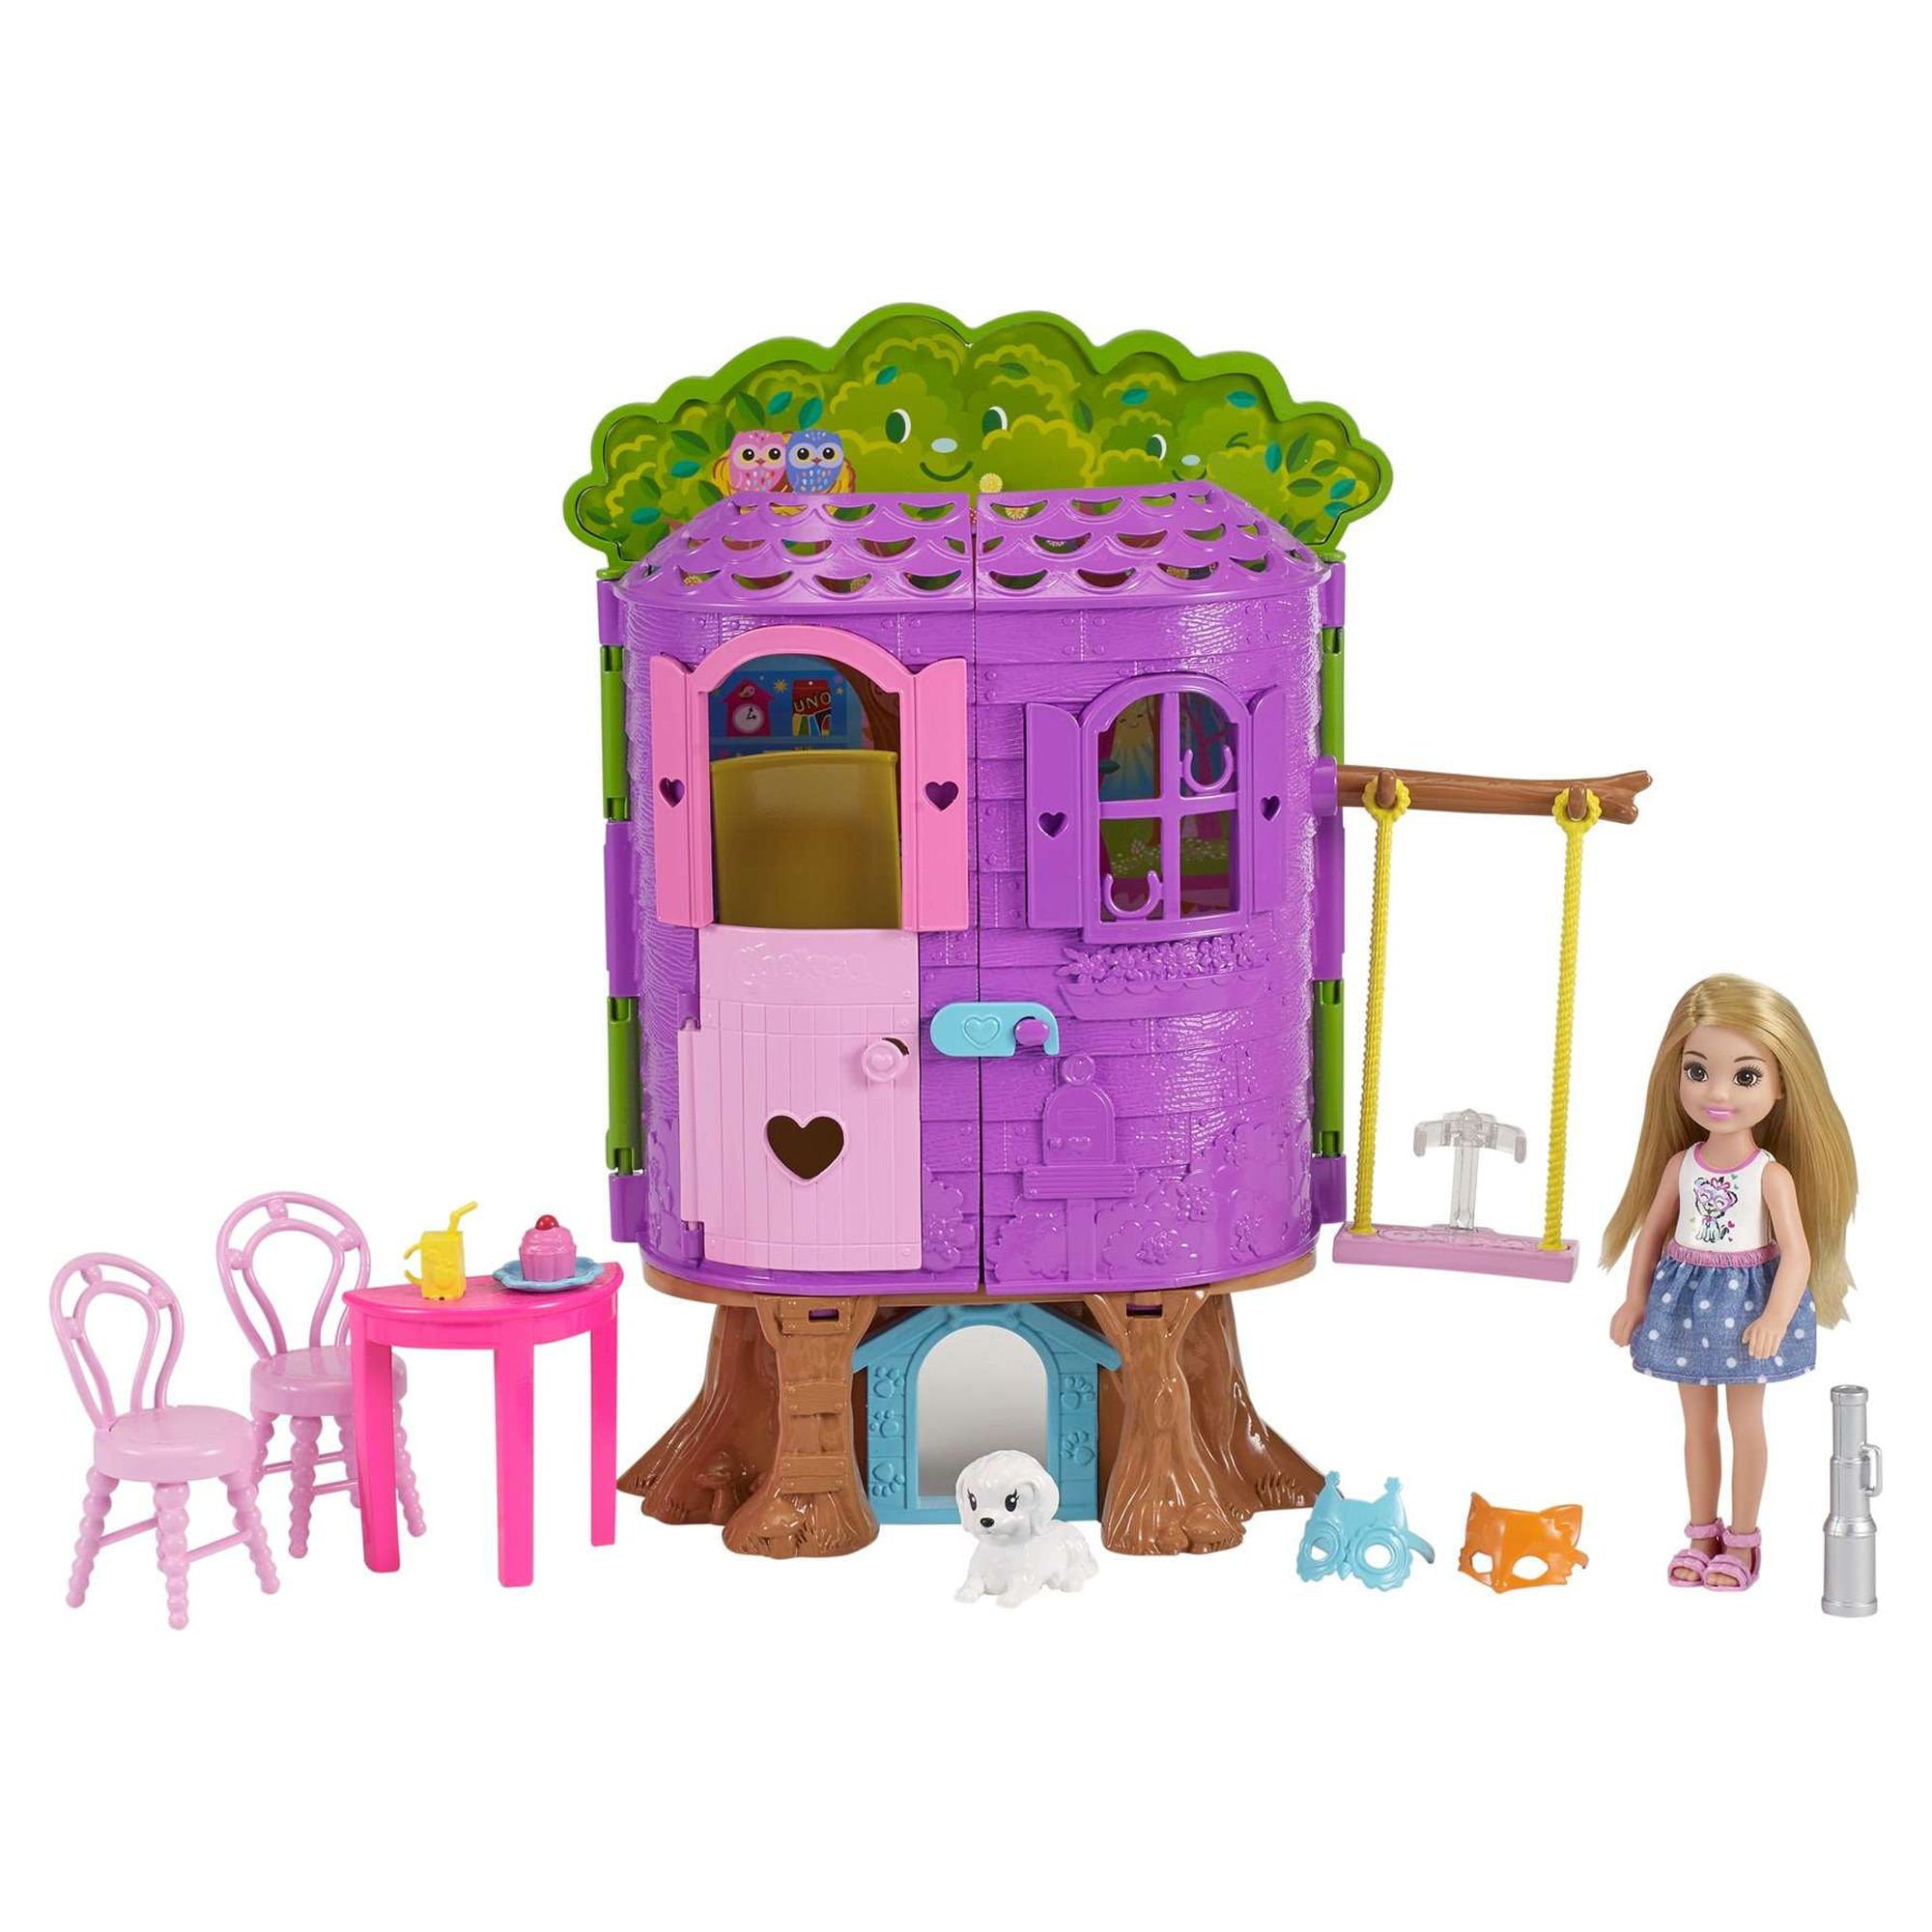 Barbie Club Chelsea Treehouse Dollhouse Playset with Accessories - image 1 of 10